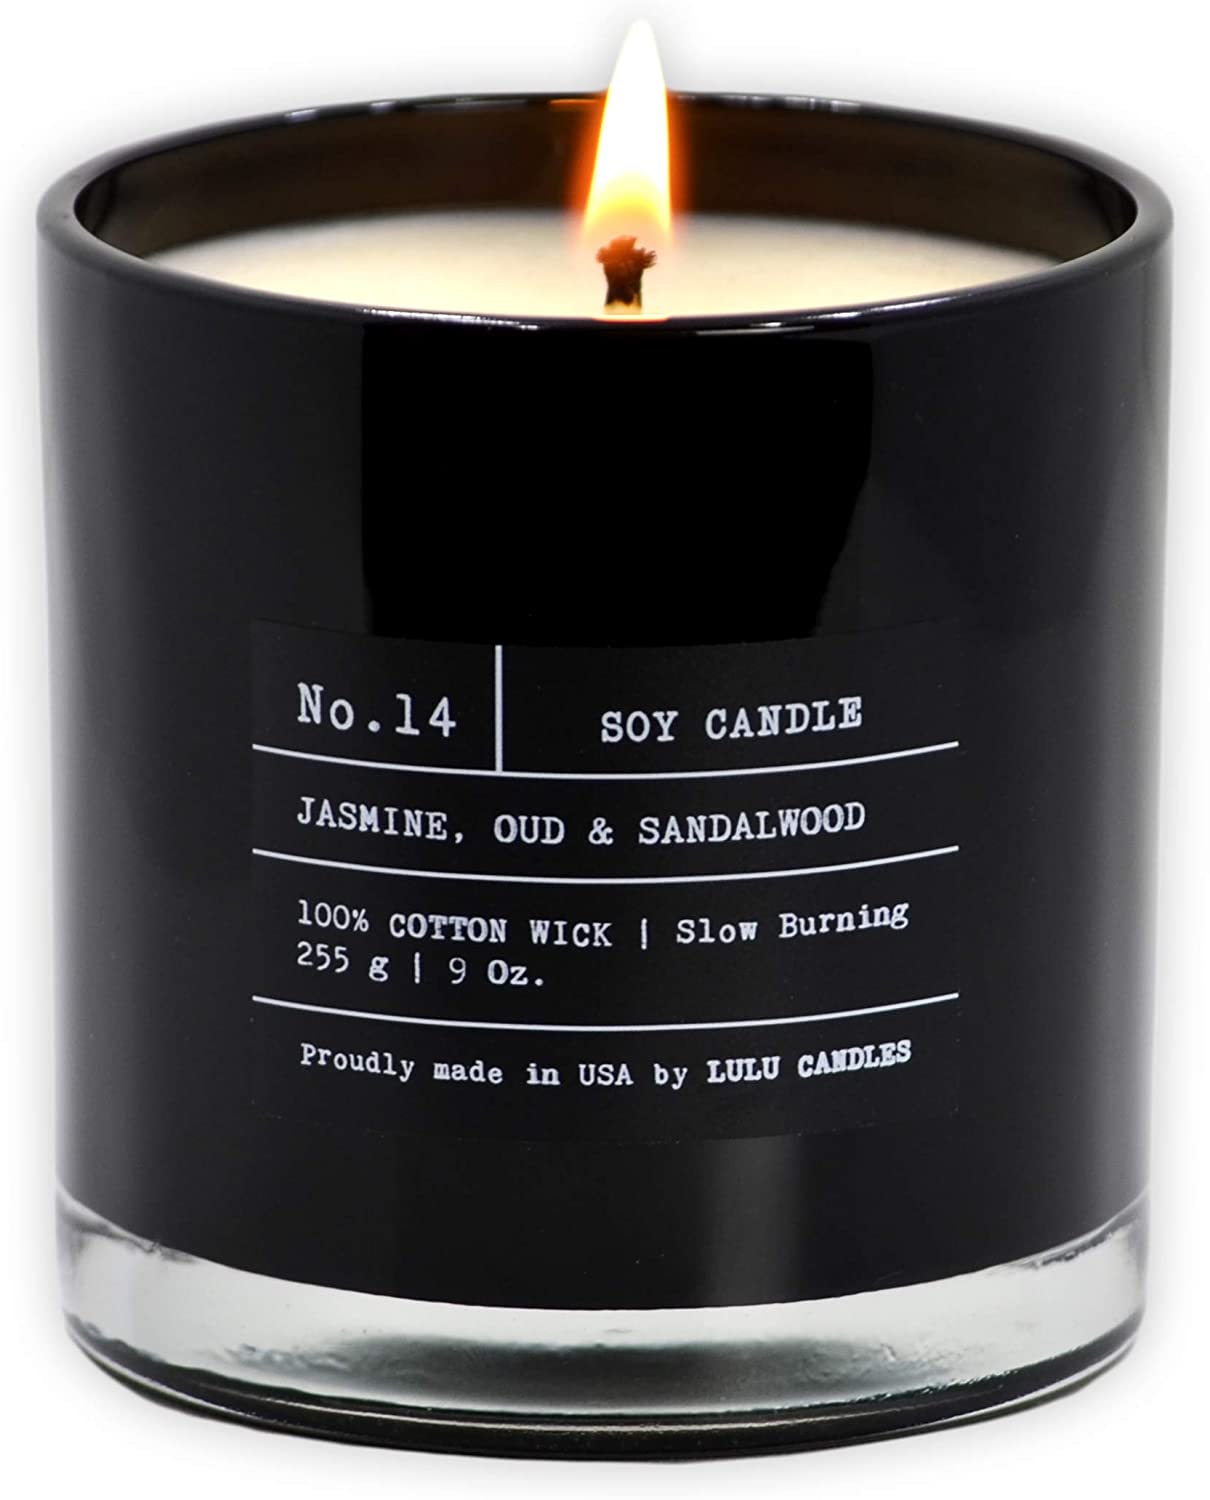 Scented candles and their amazing outcomes